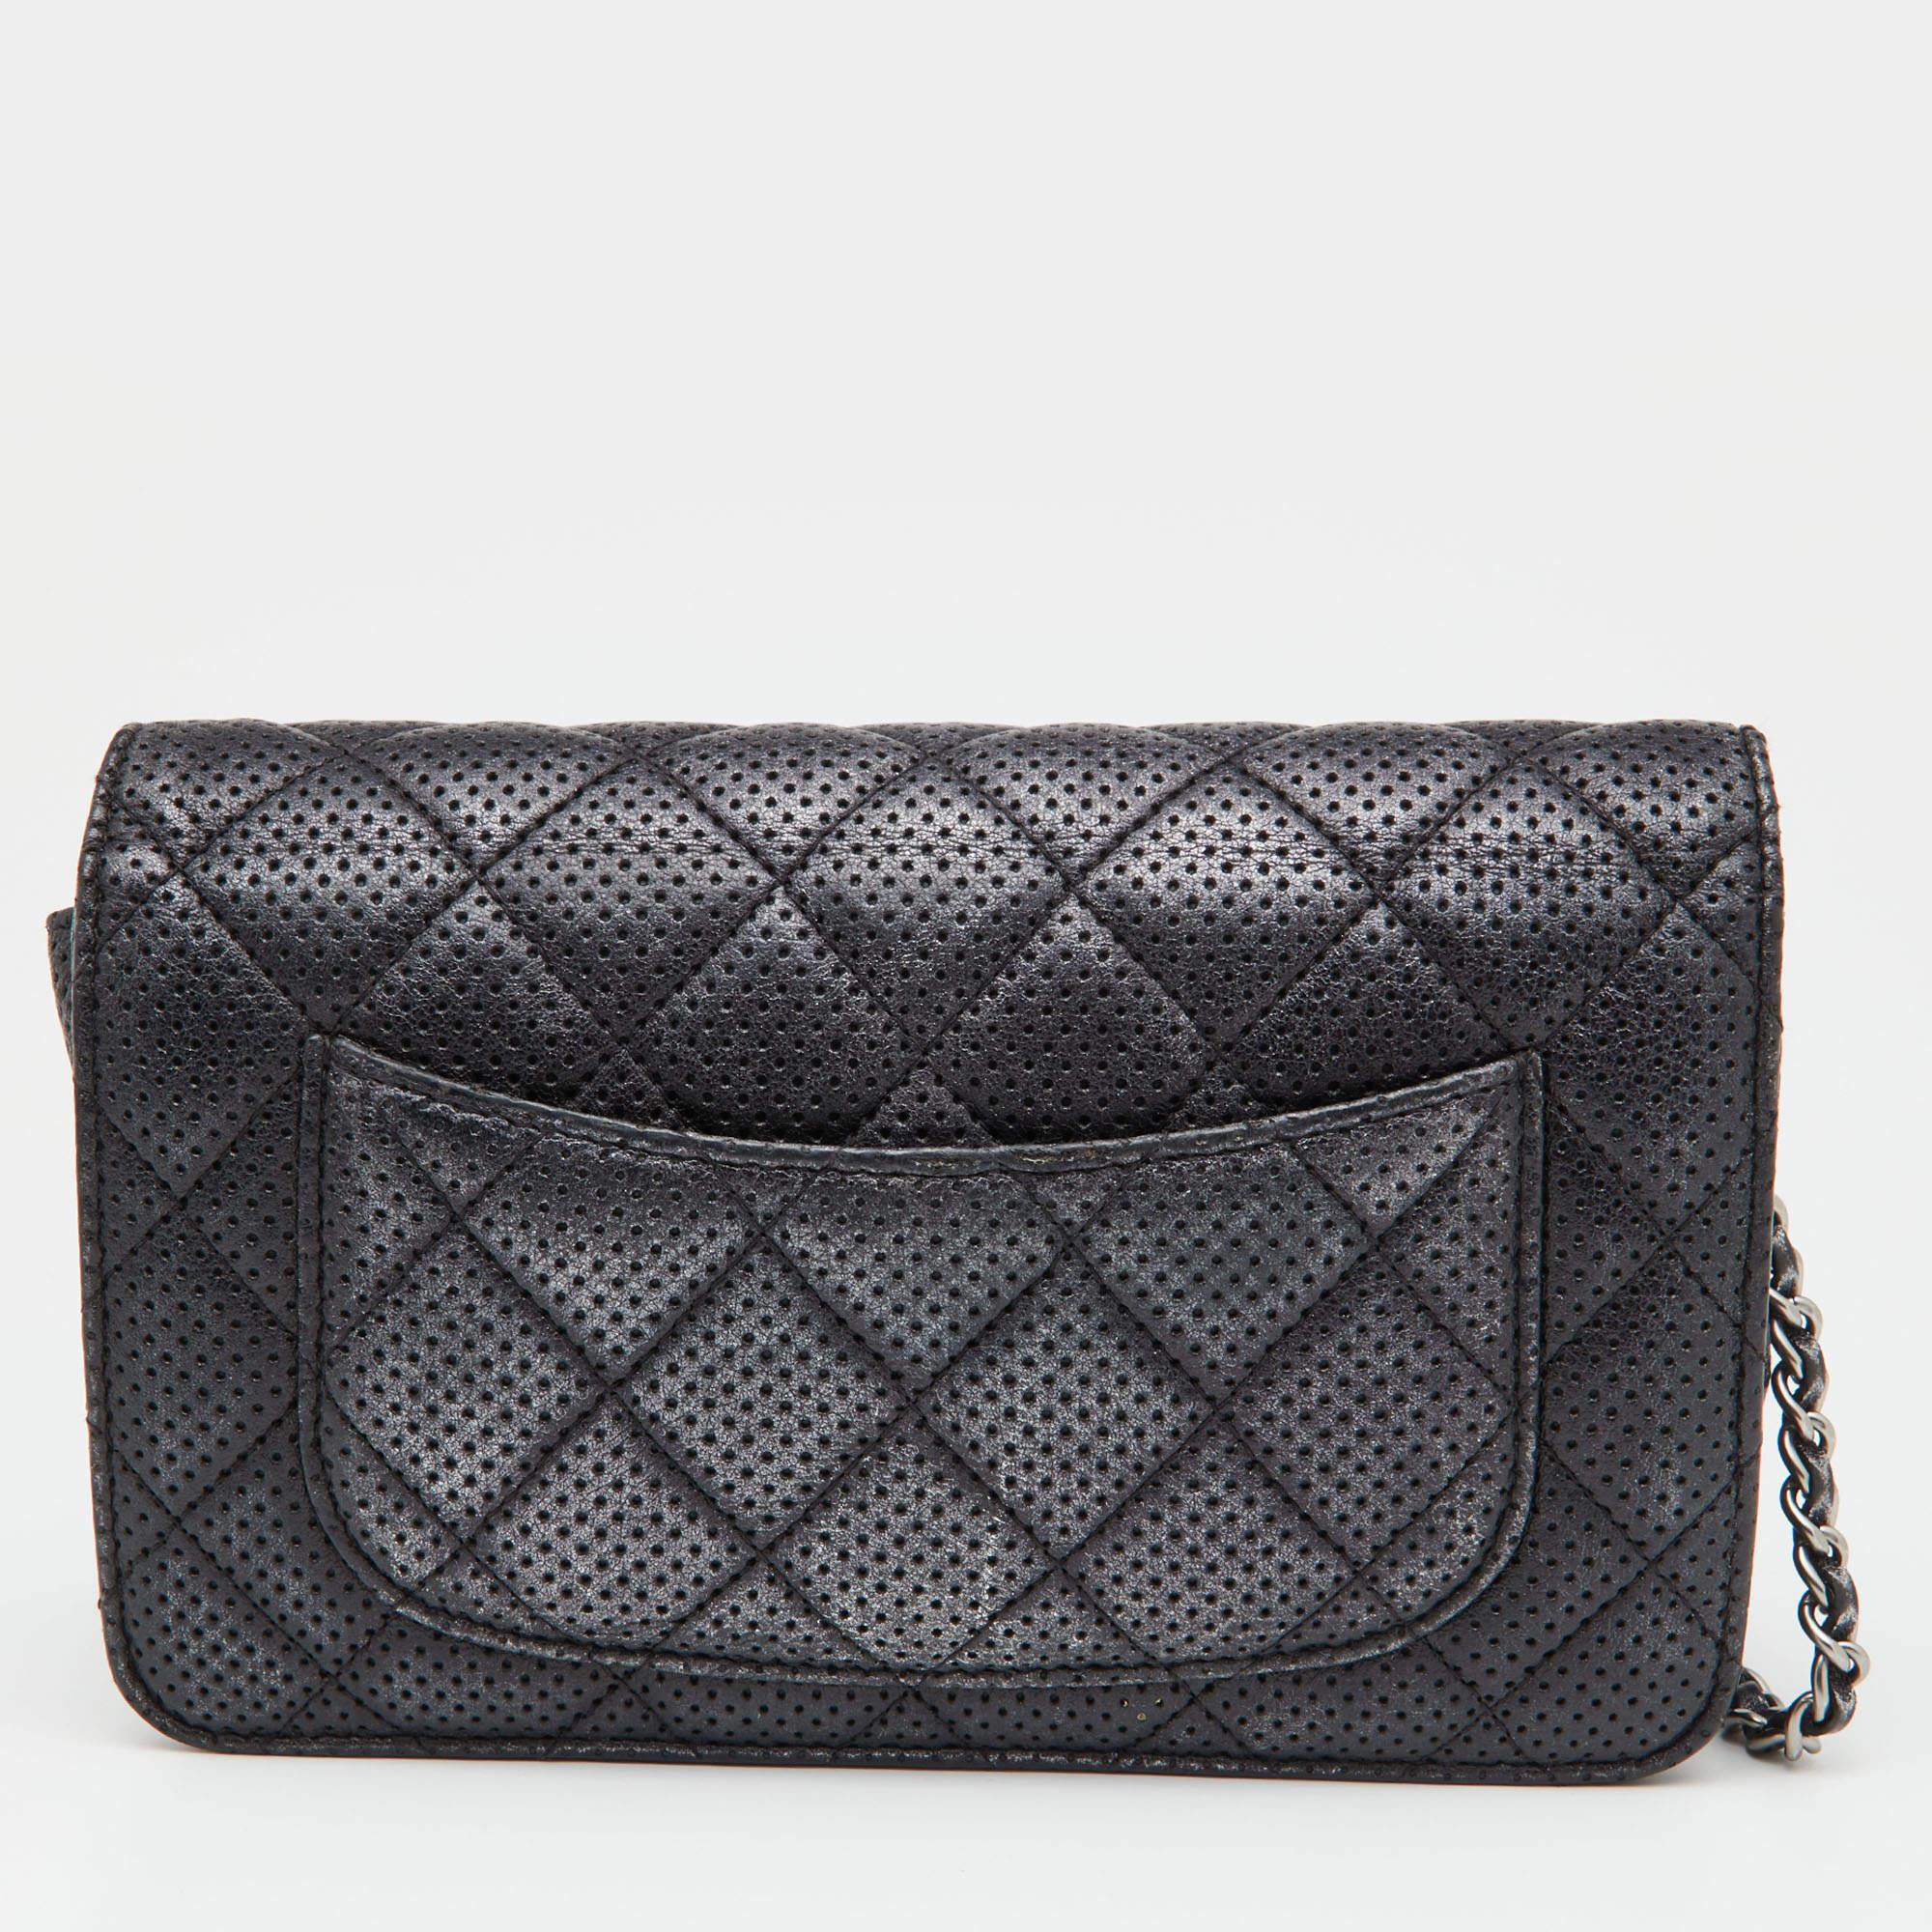 Trust this Chanel WOC to be light, durable, and comfortable to carry. Crafted from leather, it comes in a black shade. It features a canvas interior, a long strap, and a logo at the front.

